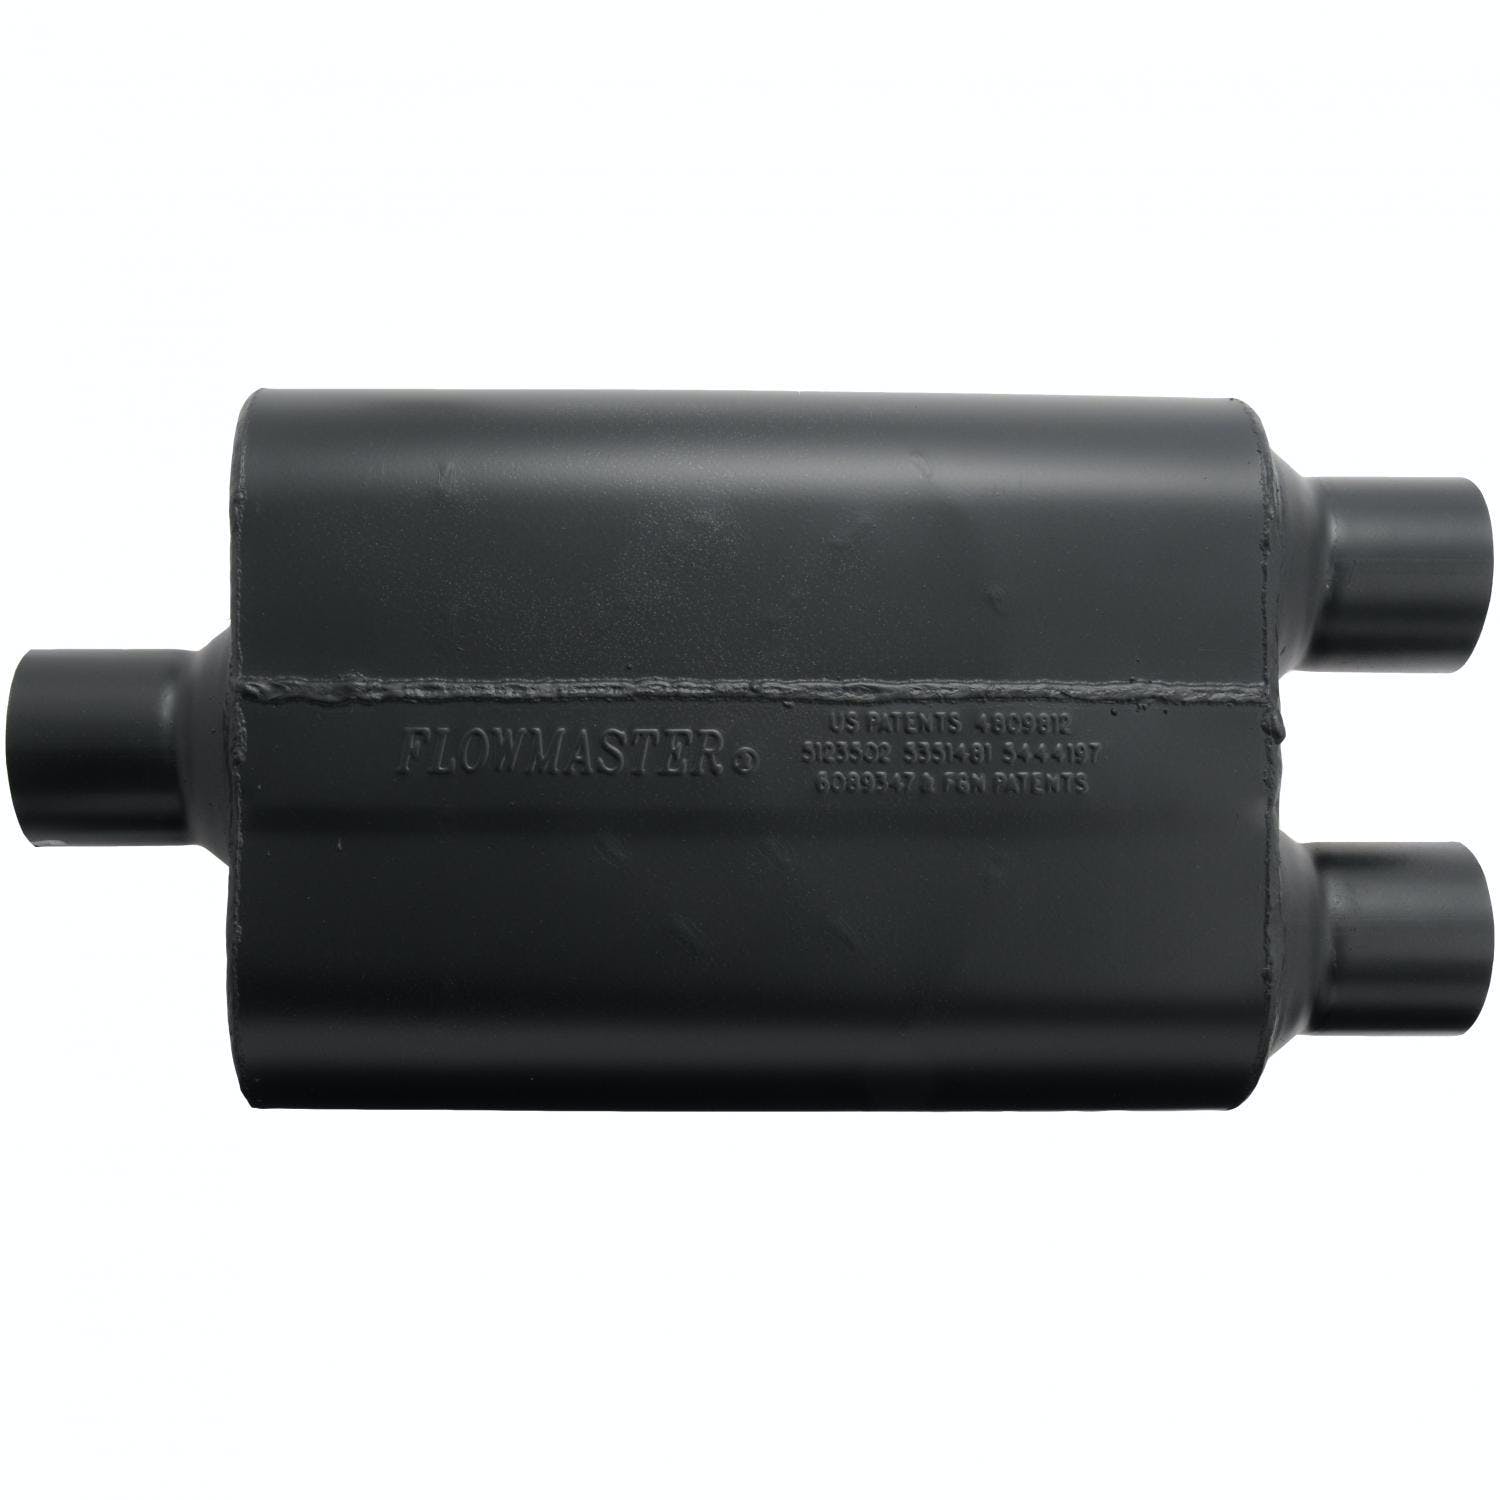 Flowmaster 9425472 2.5 IN(C)/OUT(D) SUPER 44 SERIES